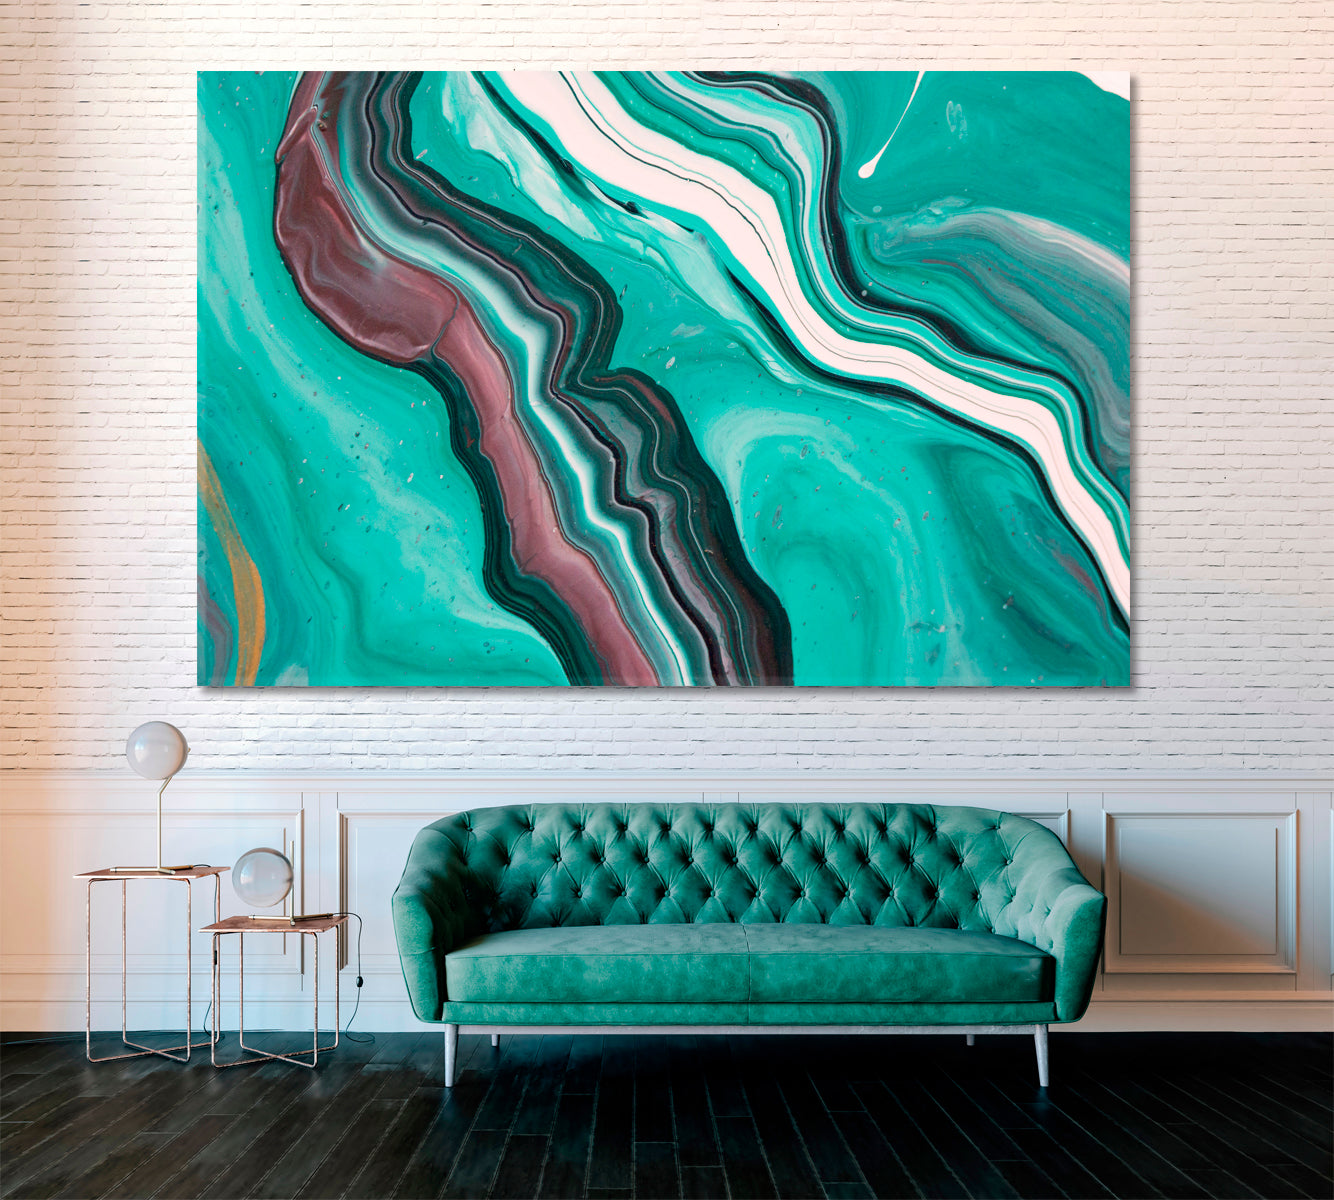 Colorful Abstract Marble Pattern Canvas Print ArtLexy 1 Panel 24"x16" inches 